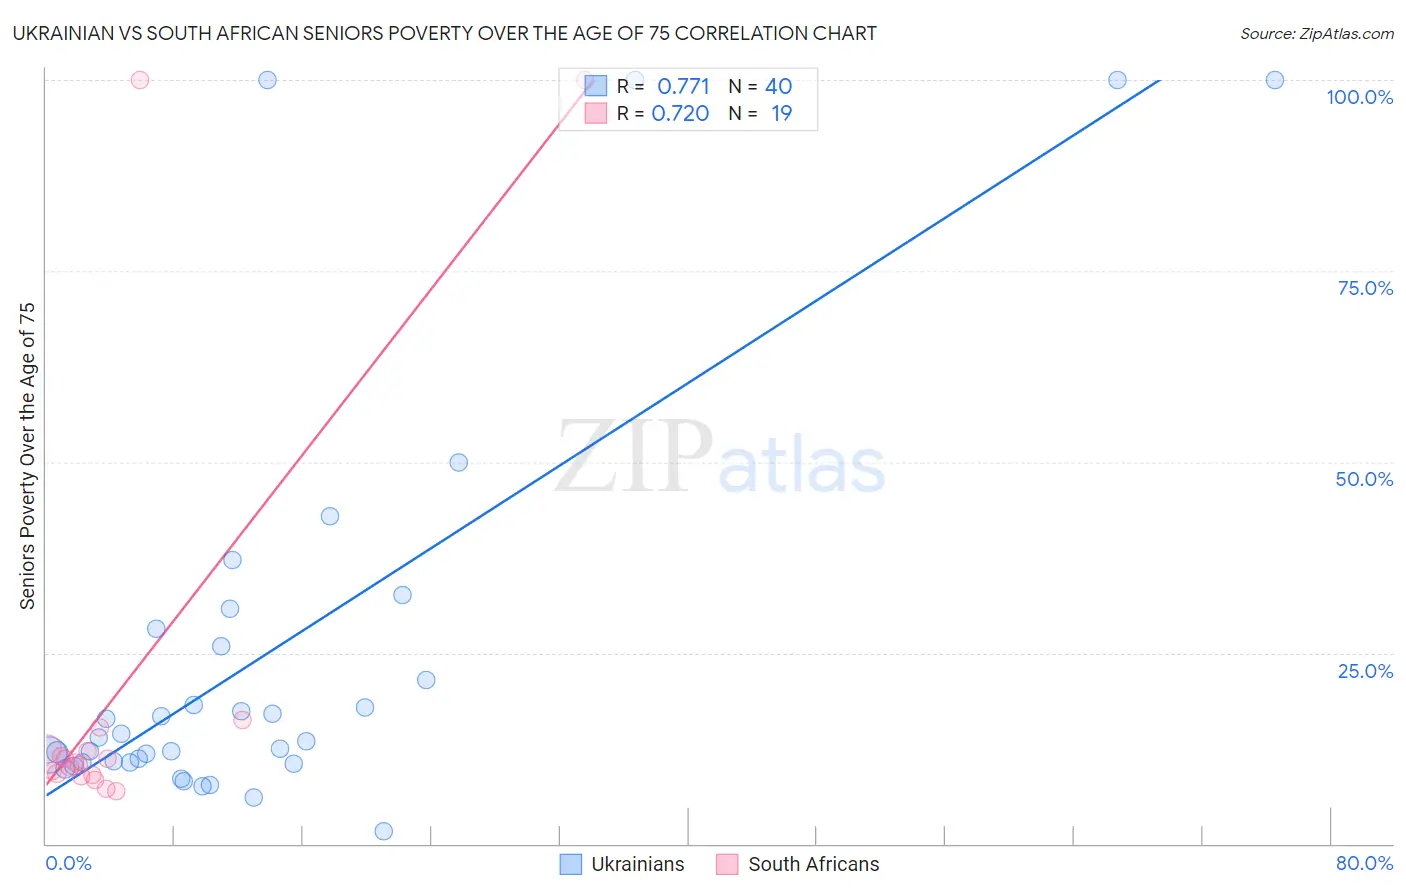 Ukrainian vs South African Seniors Poverty Over the Age of 75